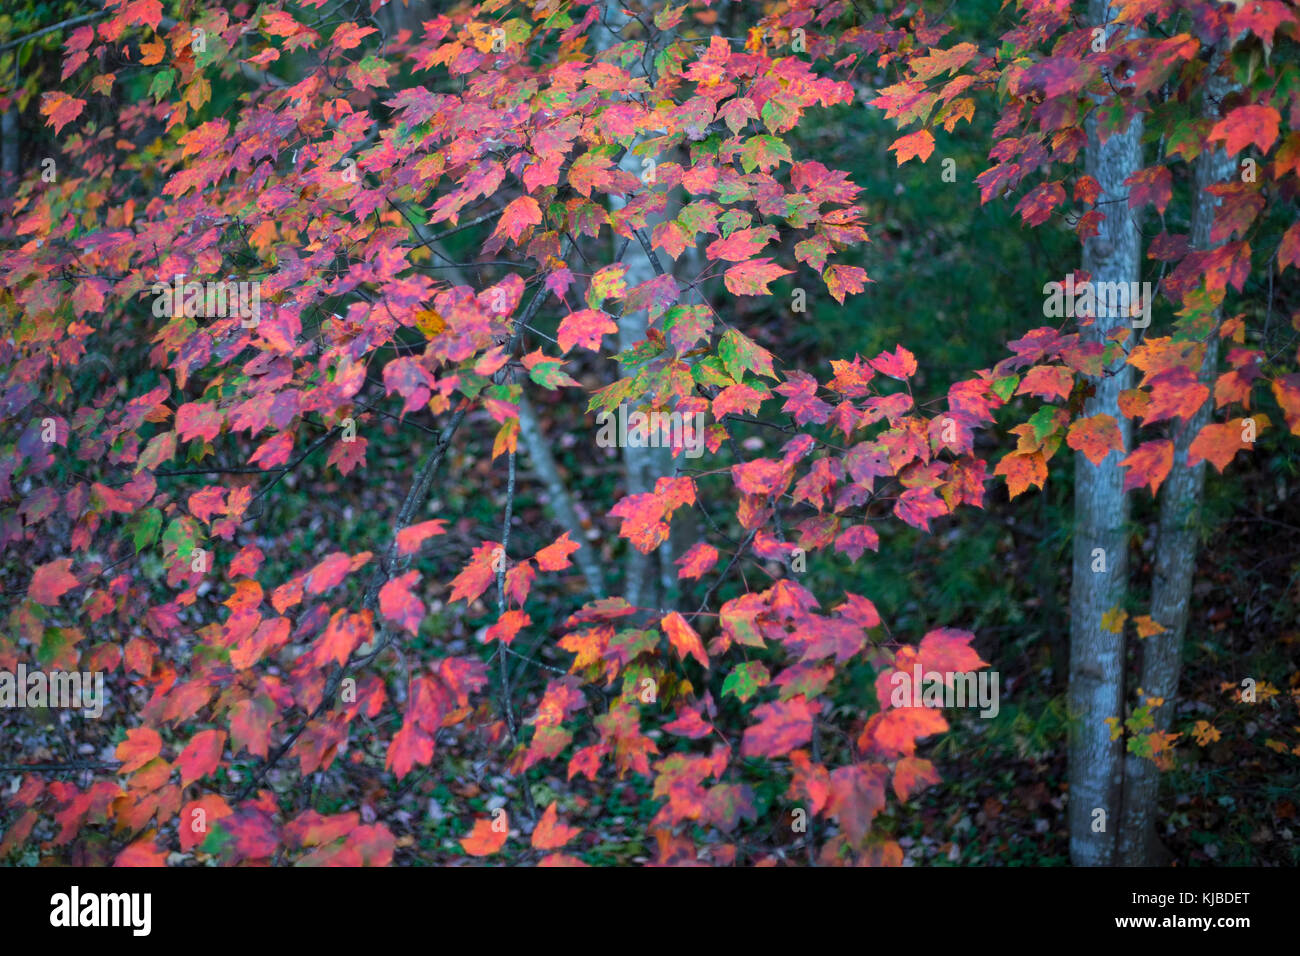 Autumn colors displayed by white poplar trees, also called silver poplar. Stock Photo